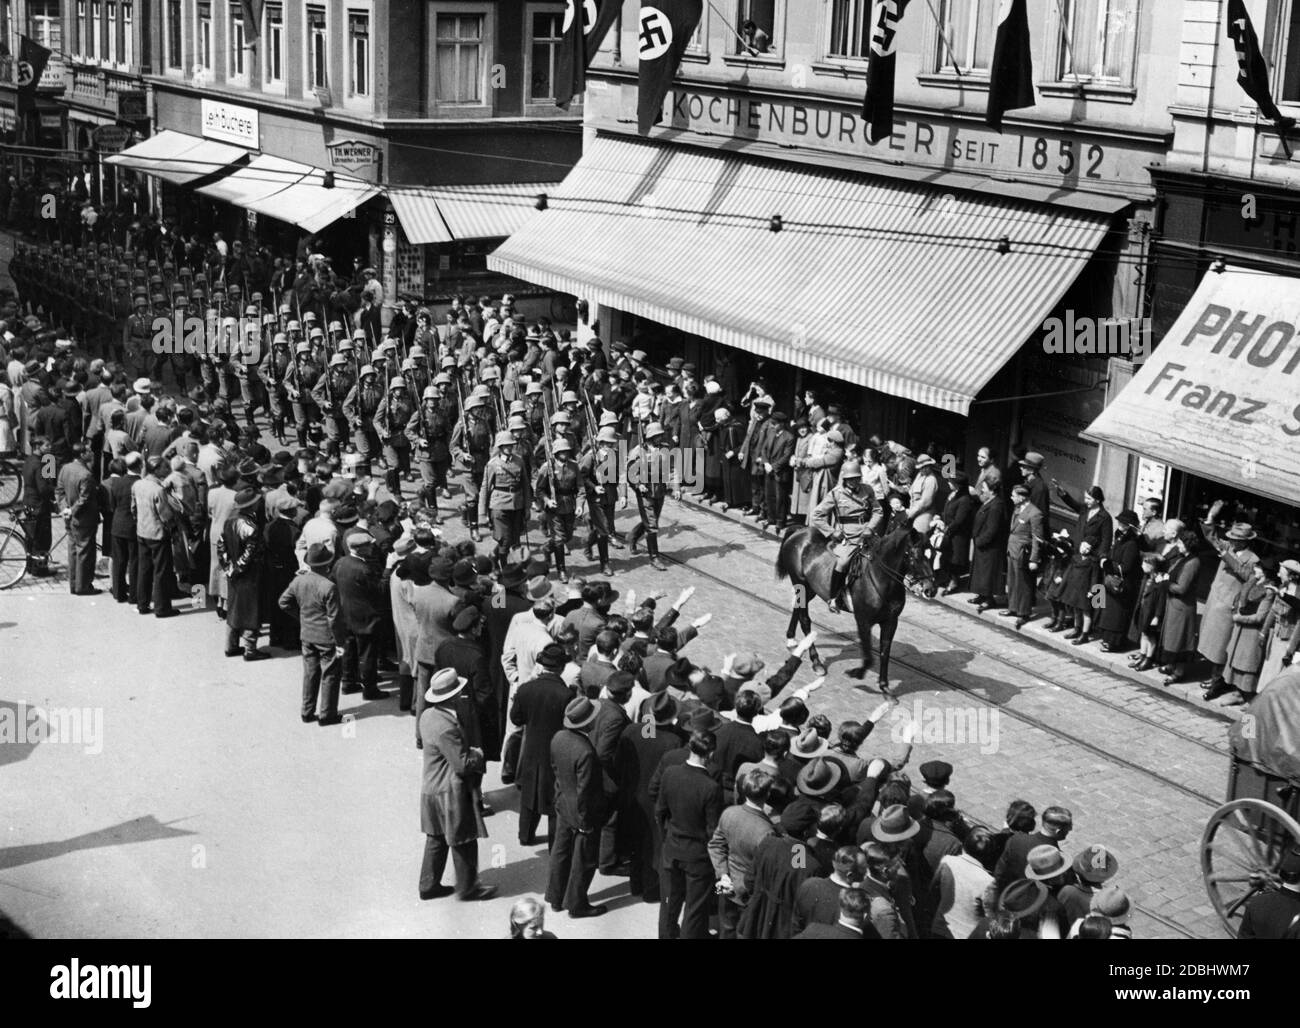 A German Infrantry troop marches through the streets of Heidelberg during a parade. Presumably the troops have just reached their new garrison town Heidelberg. Stock Photo